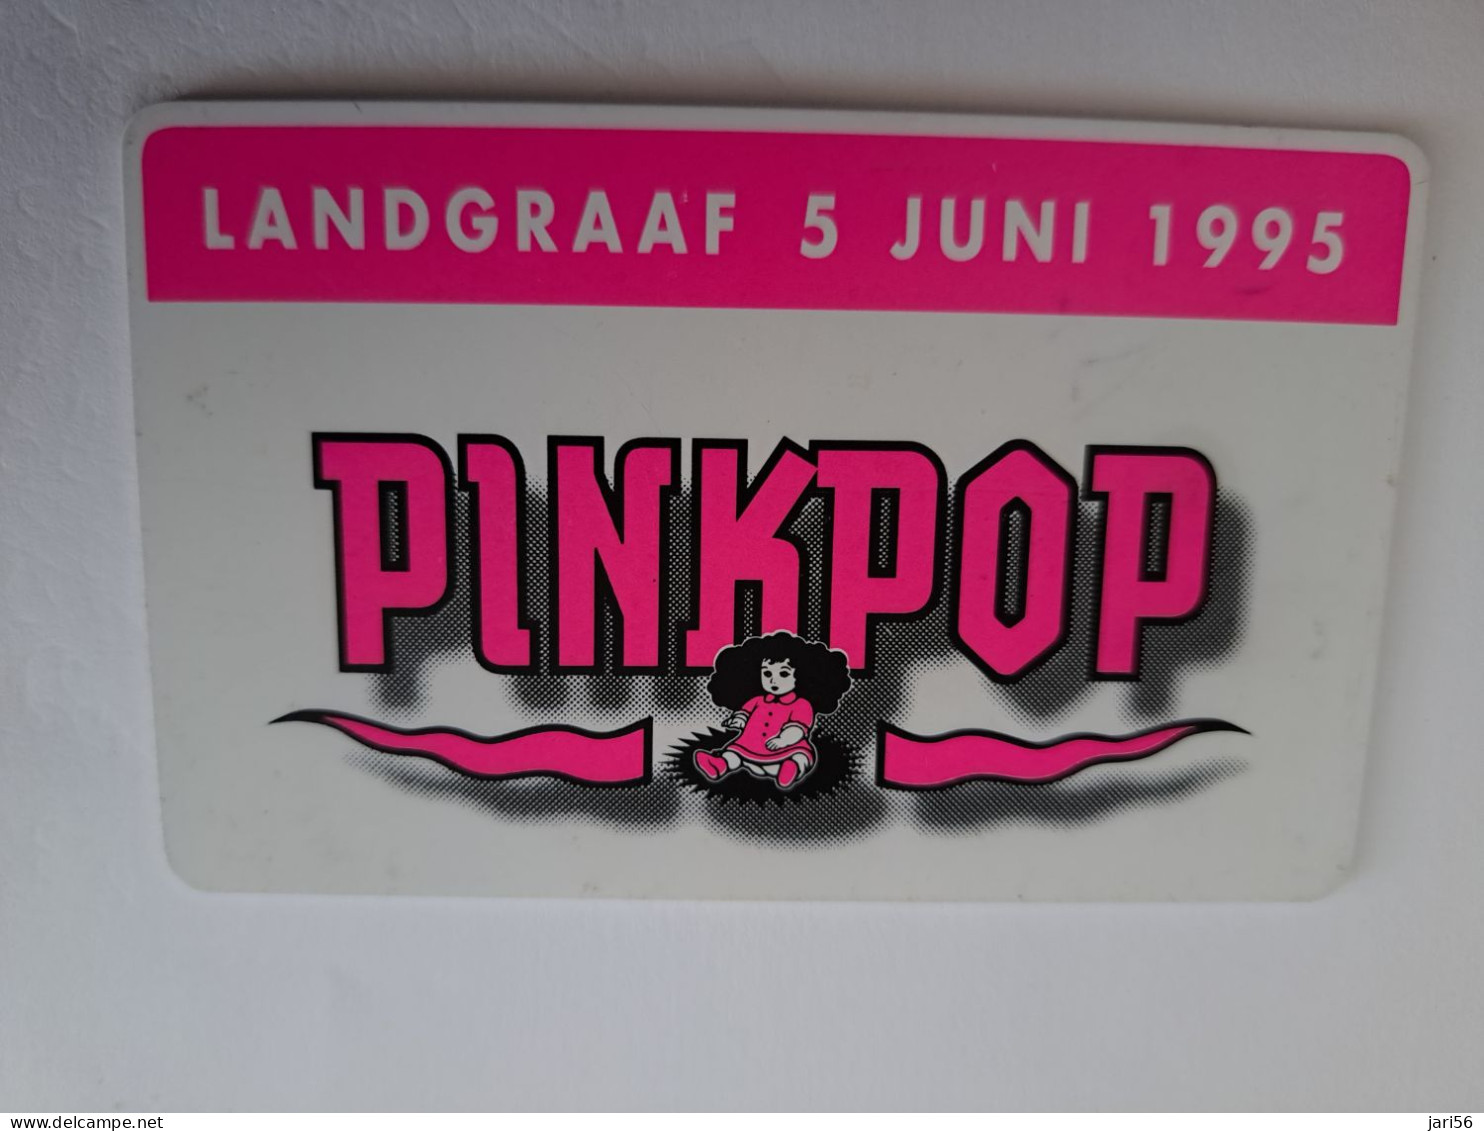 NETHERLANDS / CHIP ADVERTISING CARD/ HFL 5,00  / PINKPOP 1995   /     CRE 161** 14596** - Private